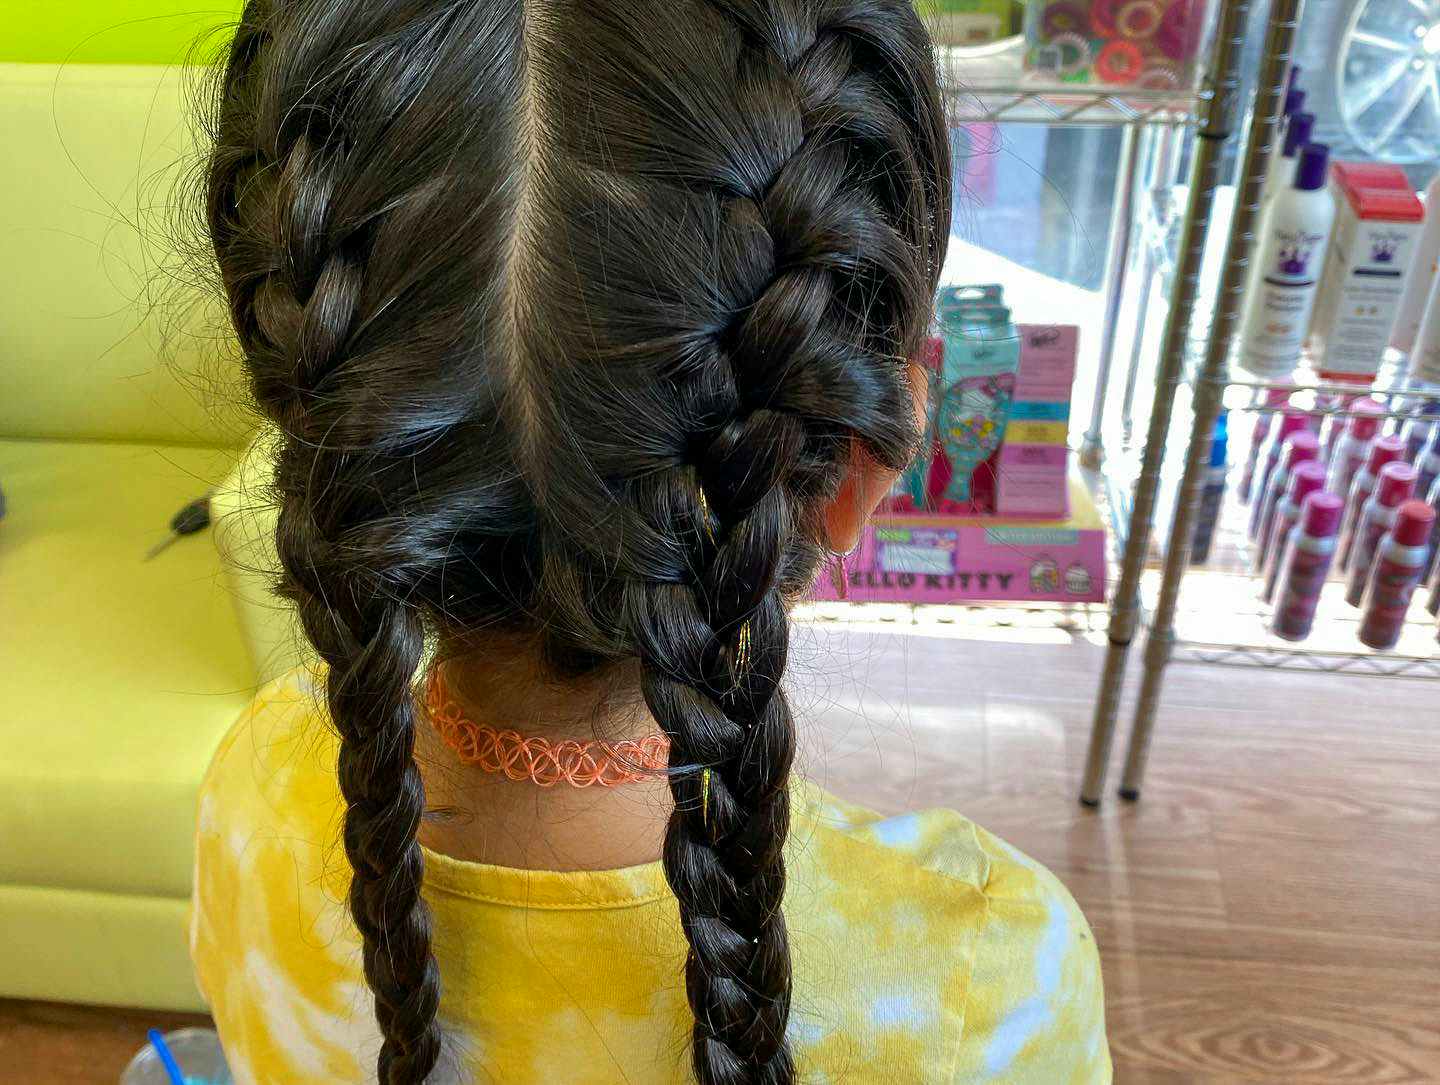 A young girl with two french braids